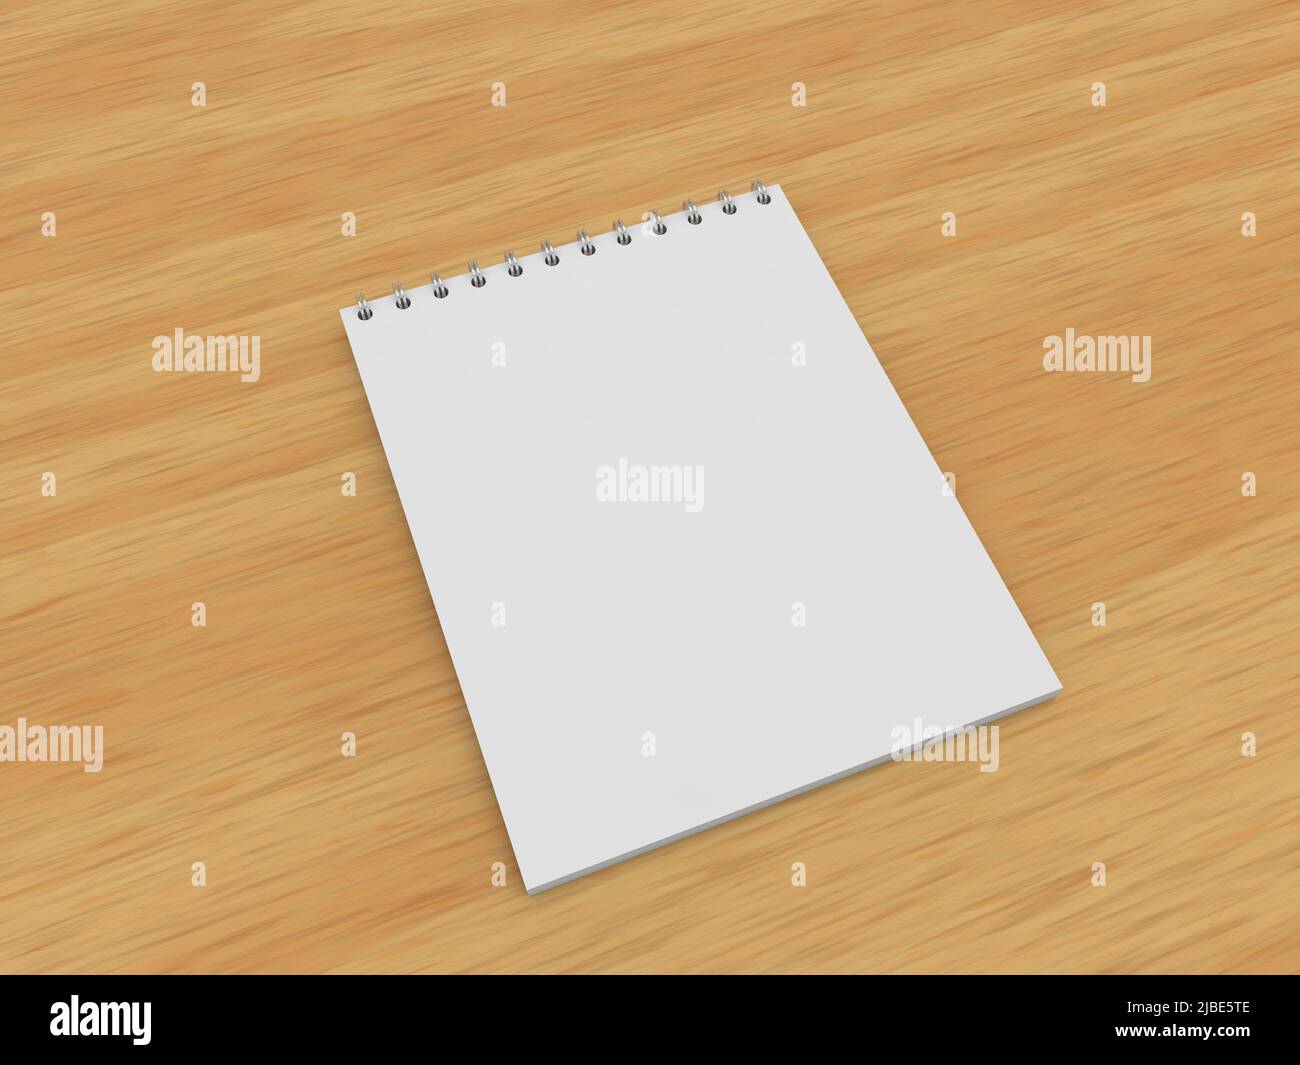 Notepad for notes on a wooden table. 3d render illustration. Stock Photo